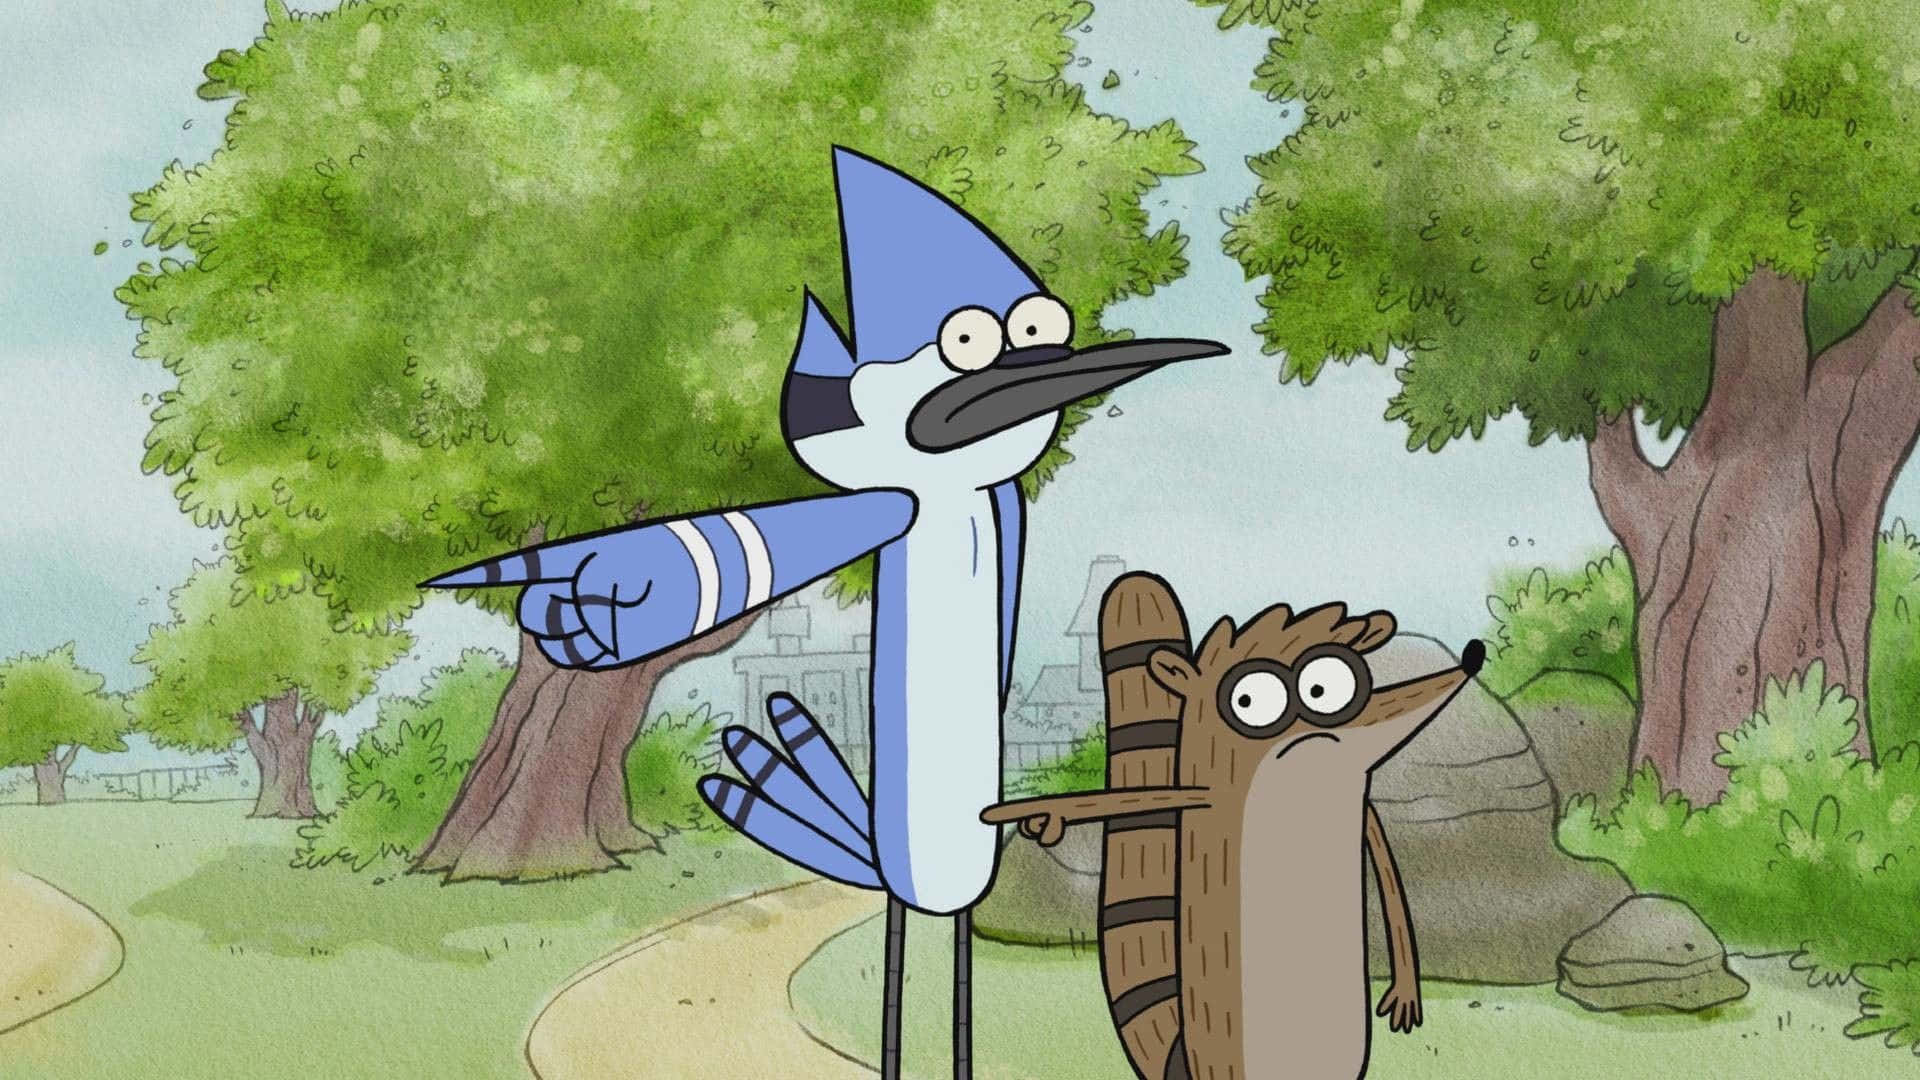 A surreal, colorful moment from the iconic Regular Show